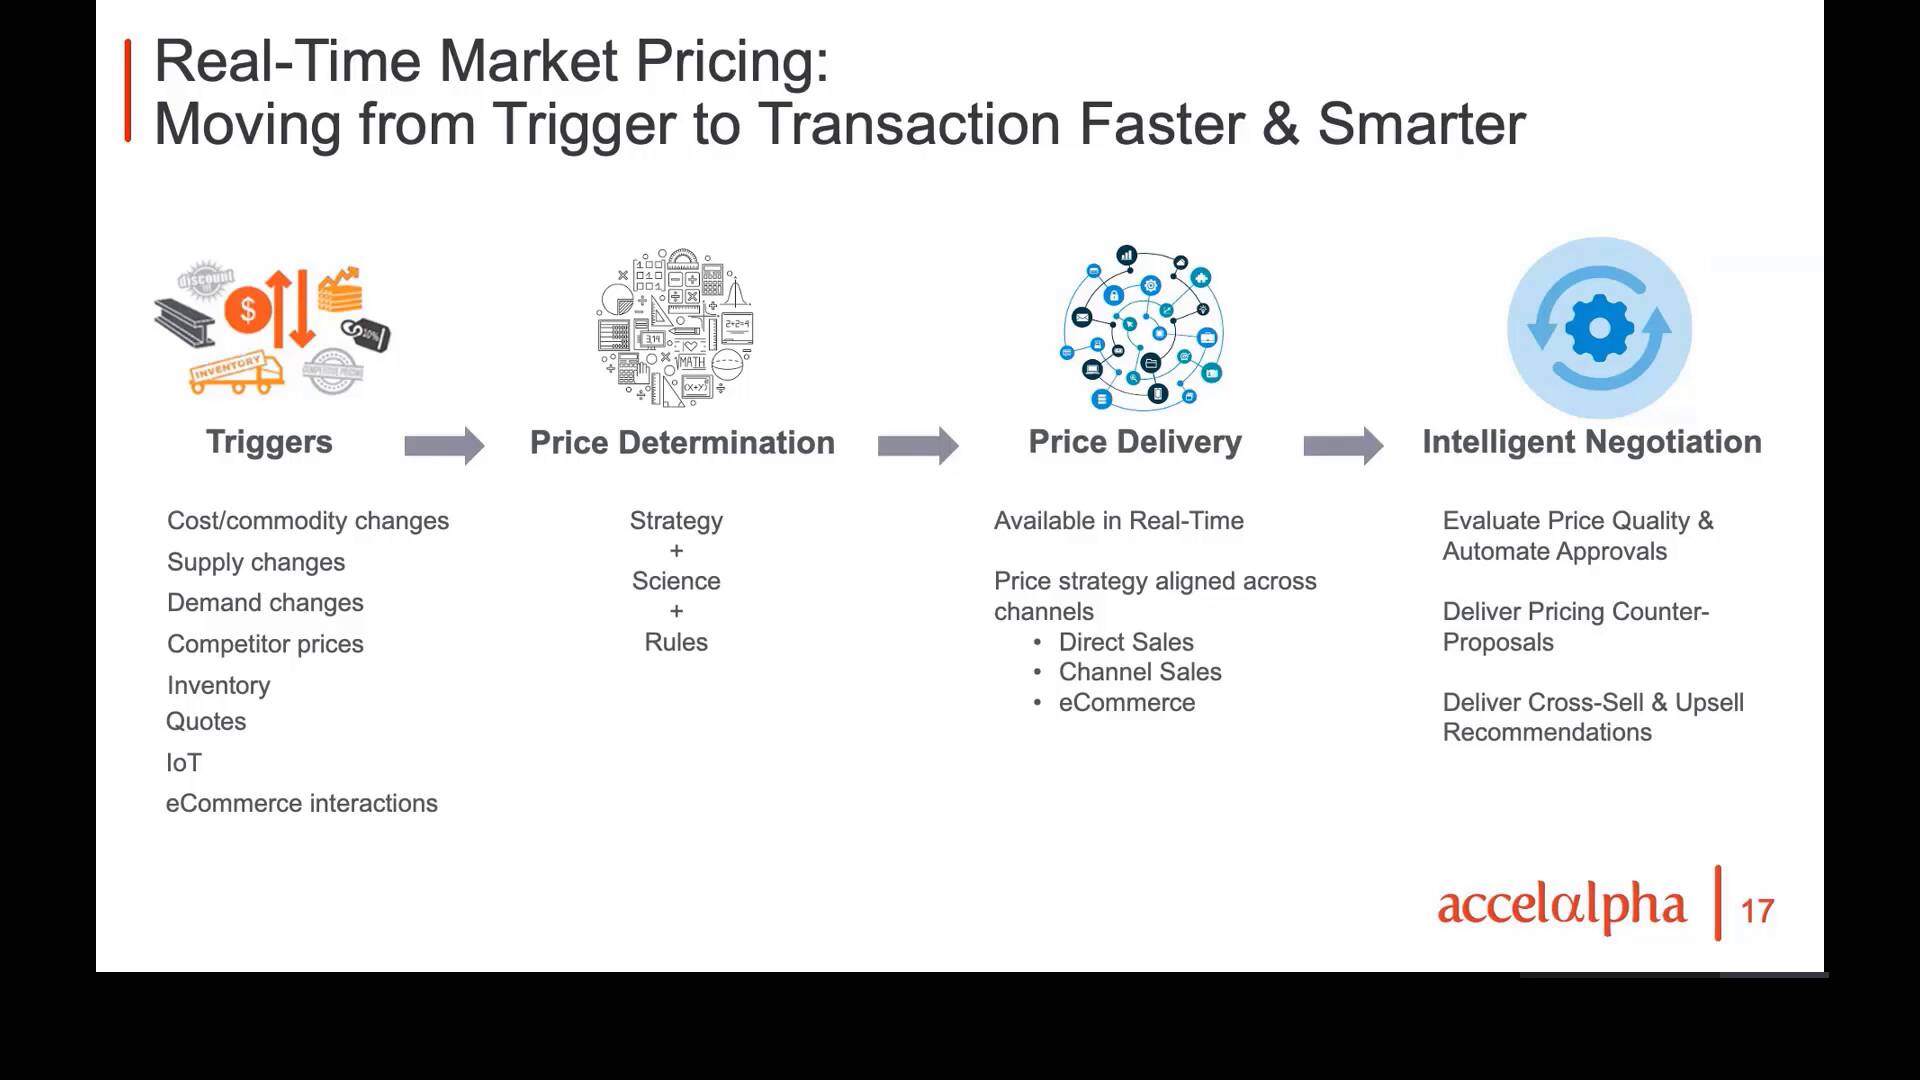 [Zilliant + Accelalpha] Adapting to the New Digital Normal: Next Generation B2B Pricing